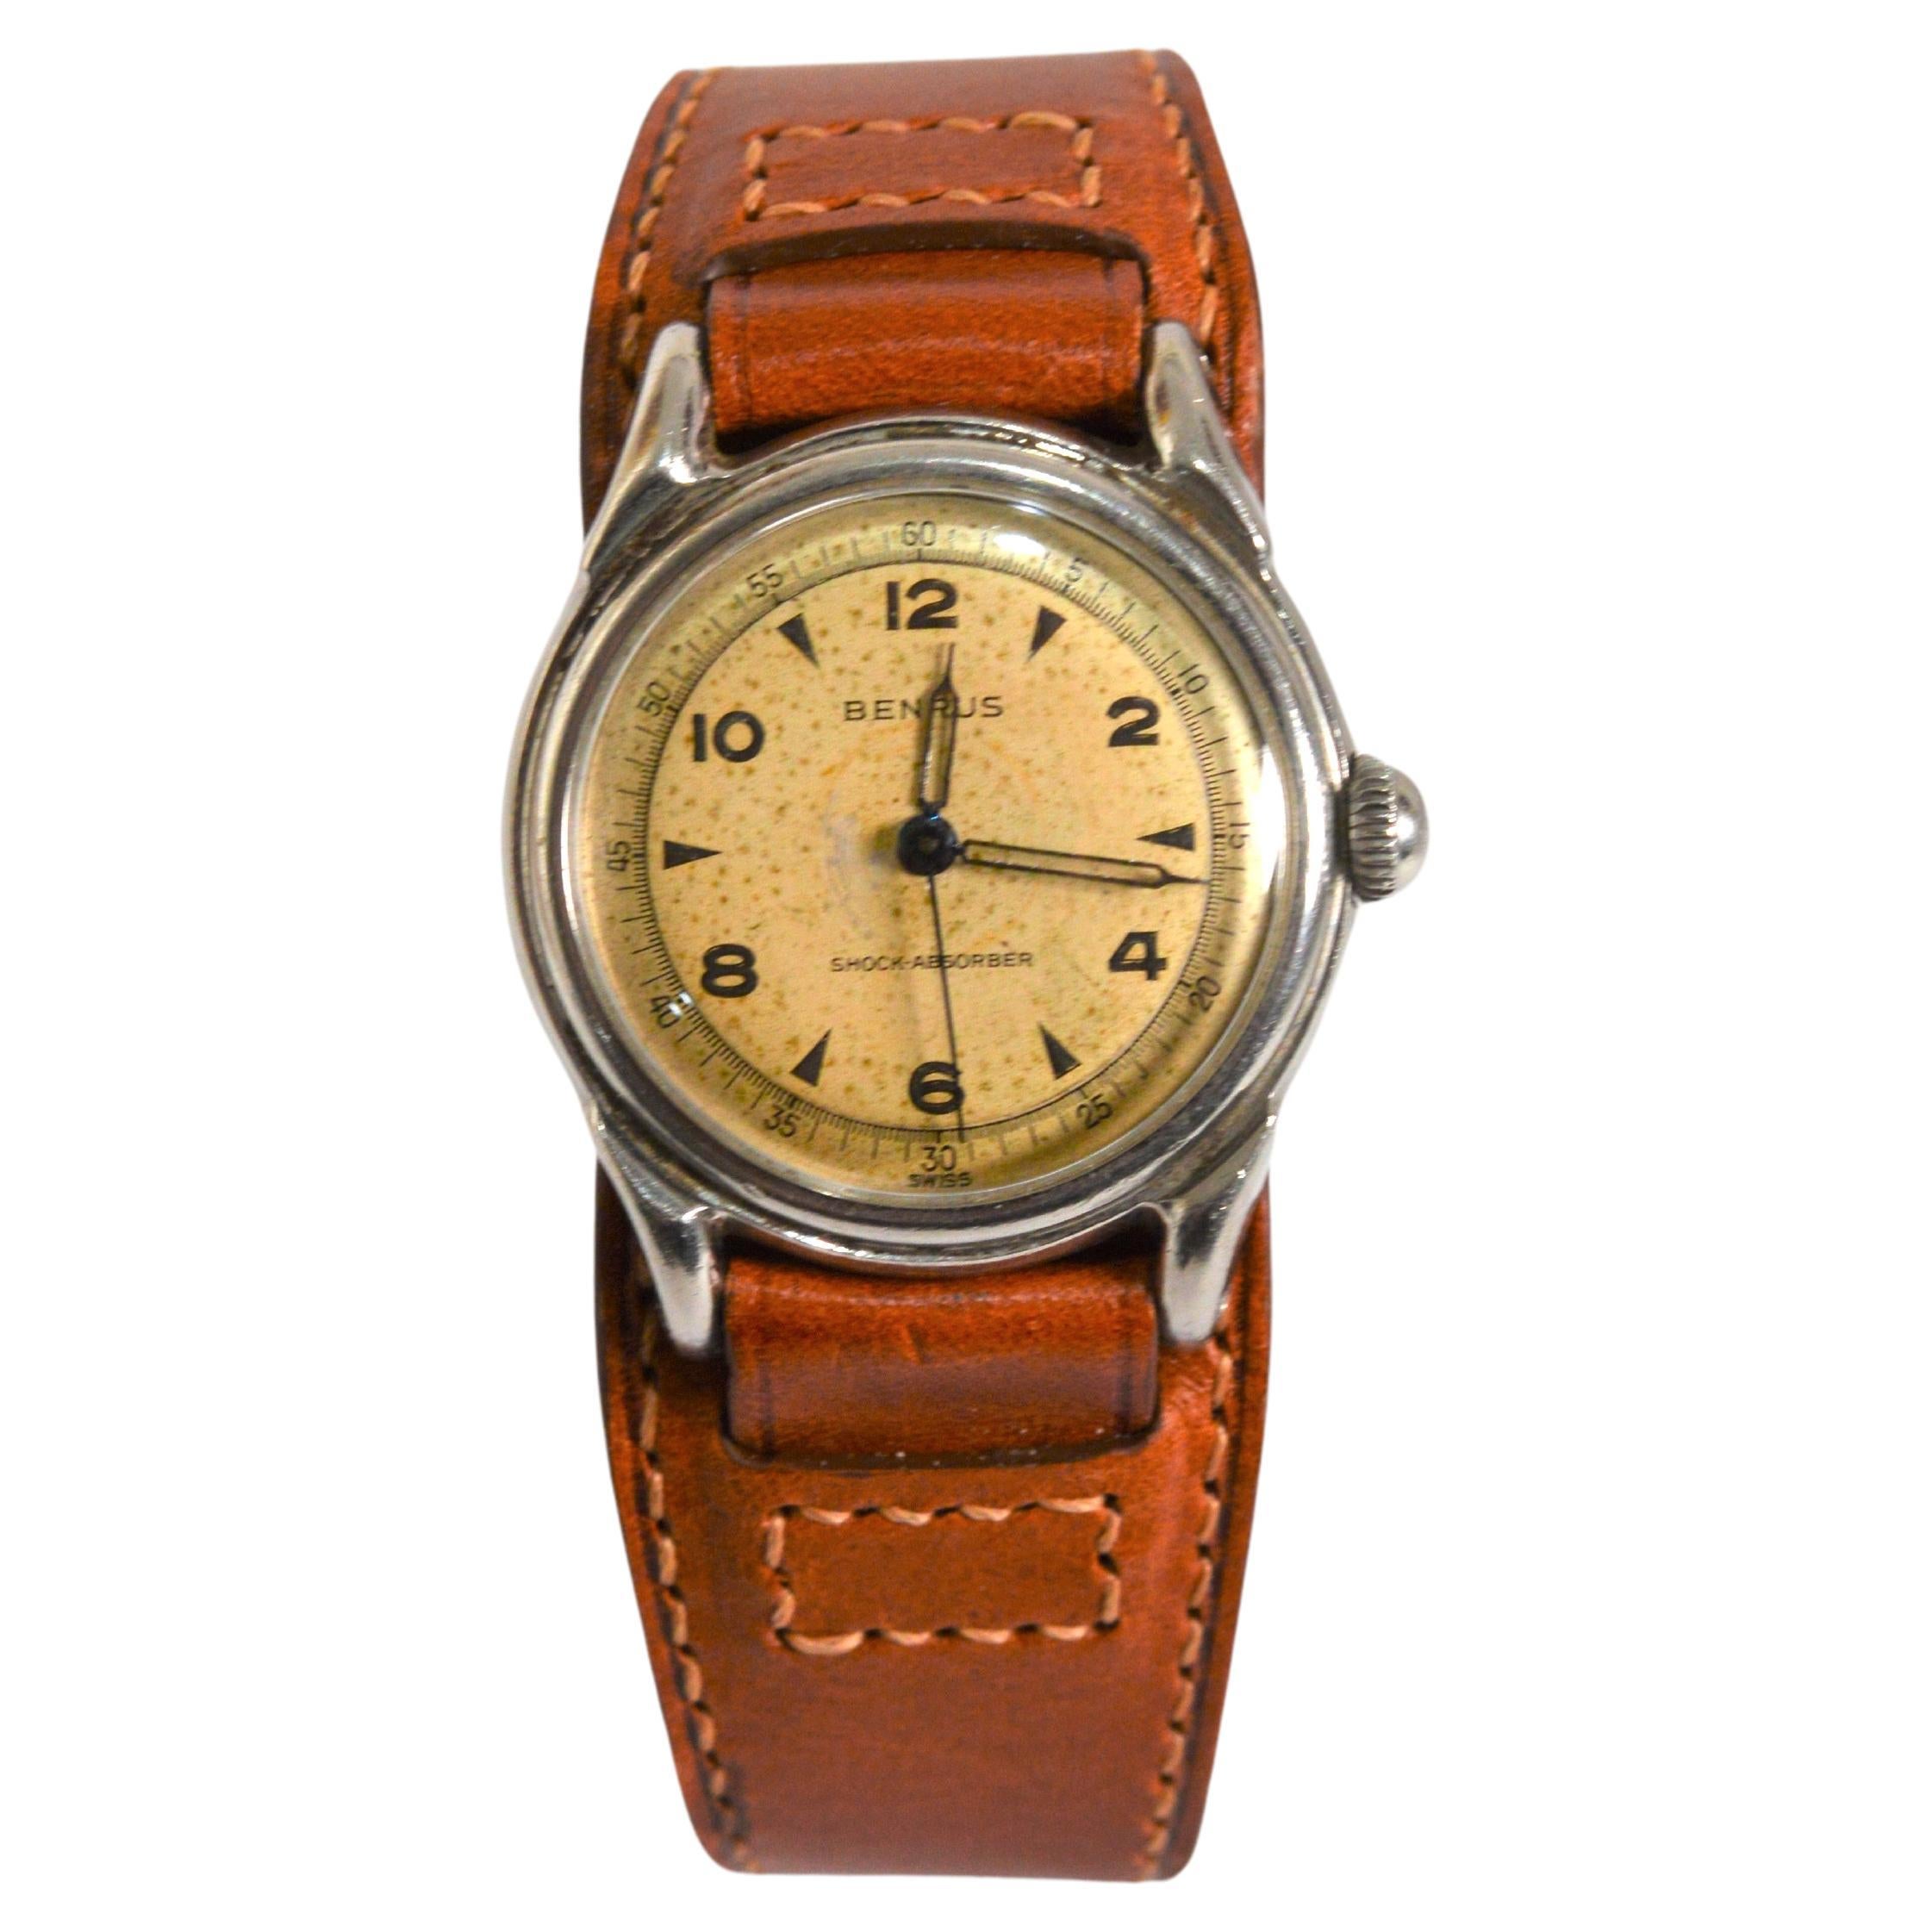 Vintage Benrus Military Style Wrist Watch with Leather Bund Strap For Sale